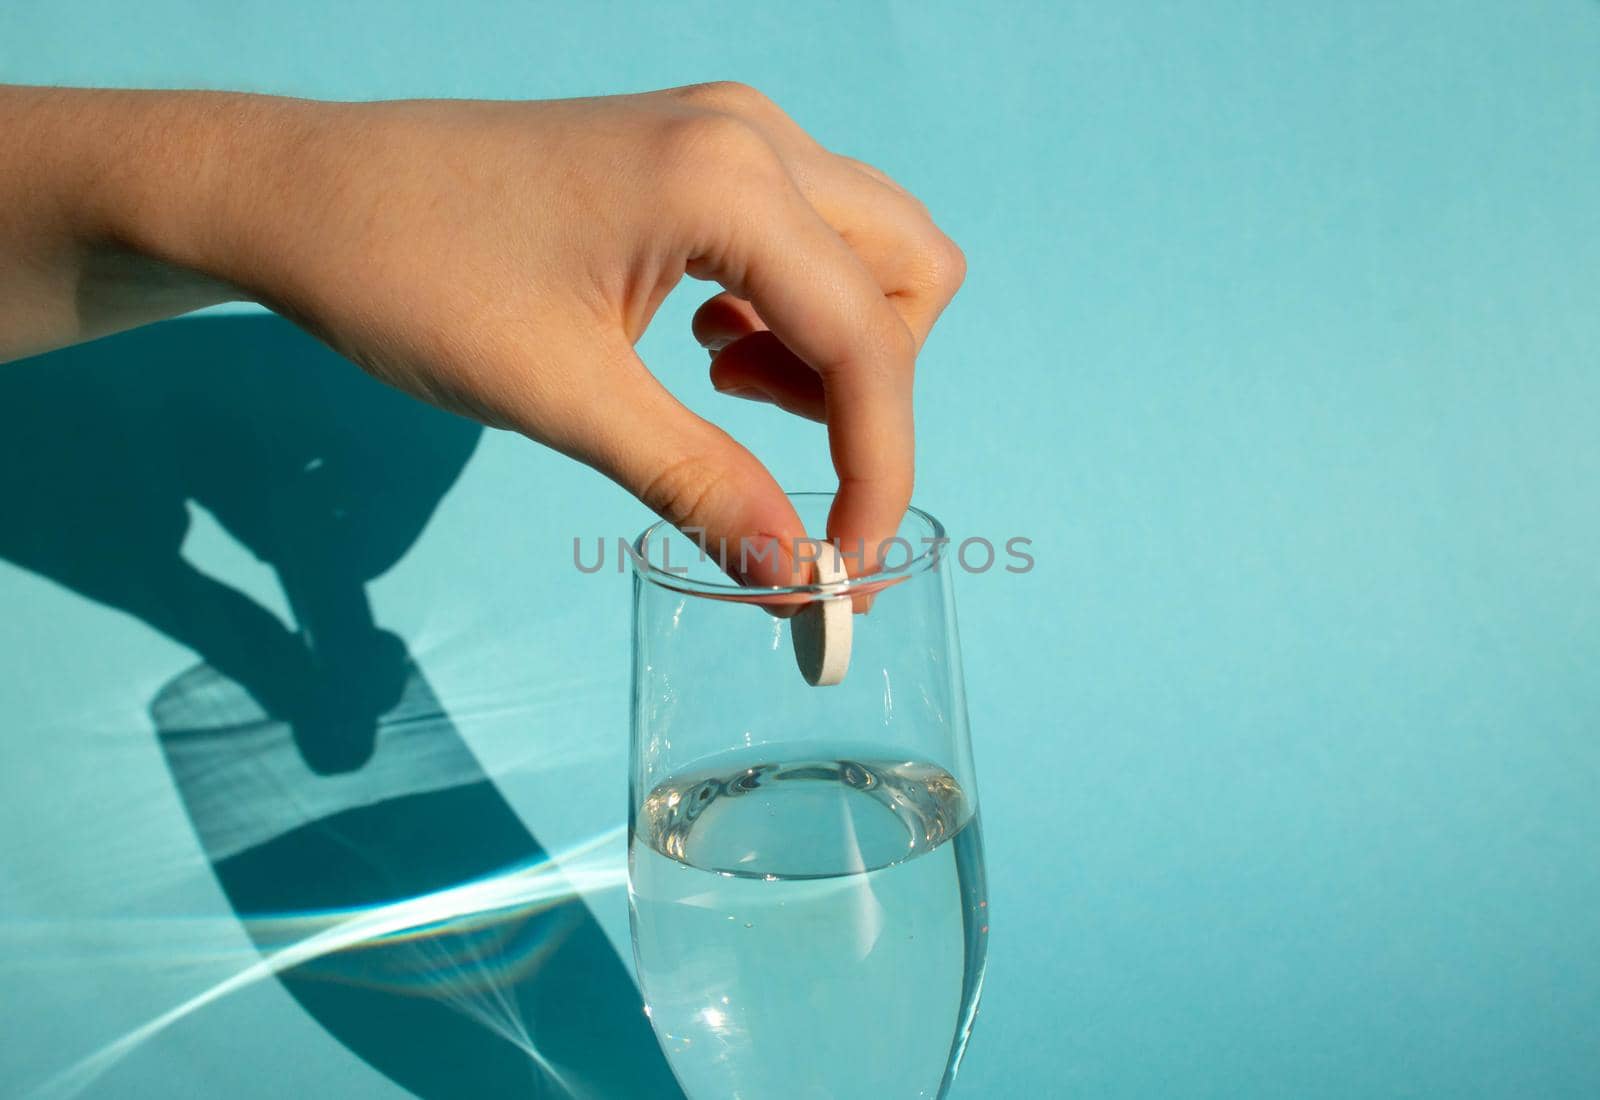 Against a blue background, a hand drops a dissolving fizzy aspirin tablet into a glass of water by lapushka62